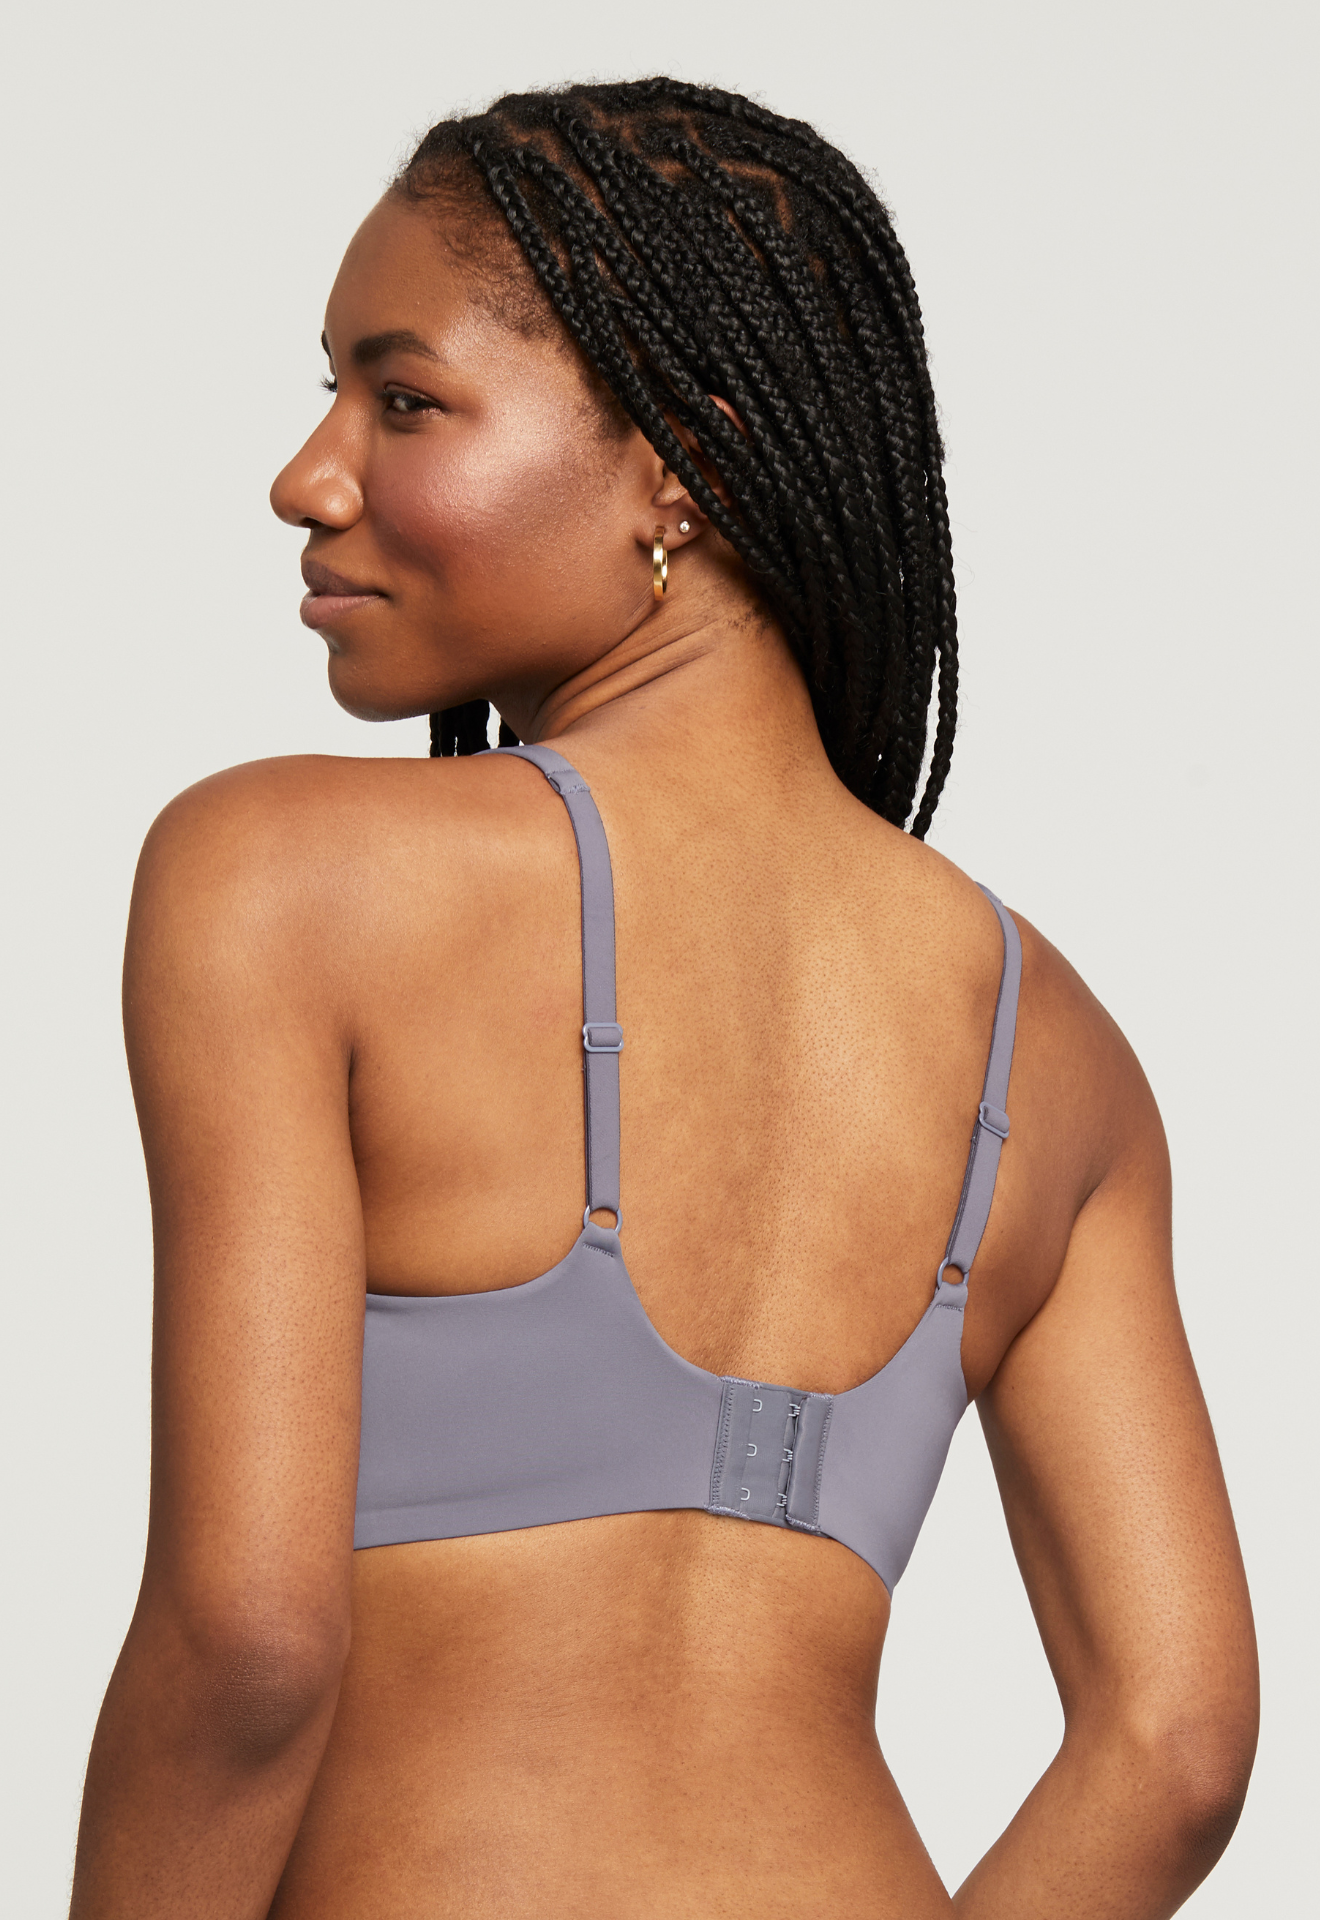 Mysa Cup-Sized Bralette - Crystal Grey worn by model back view